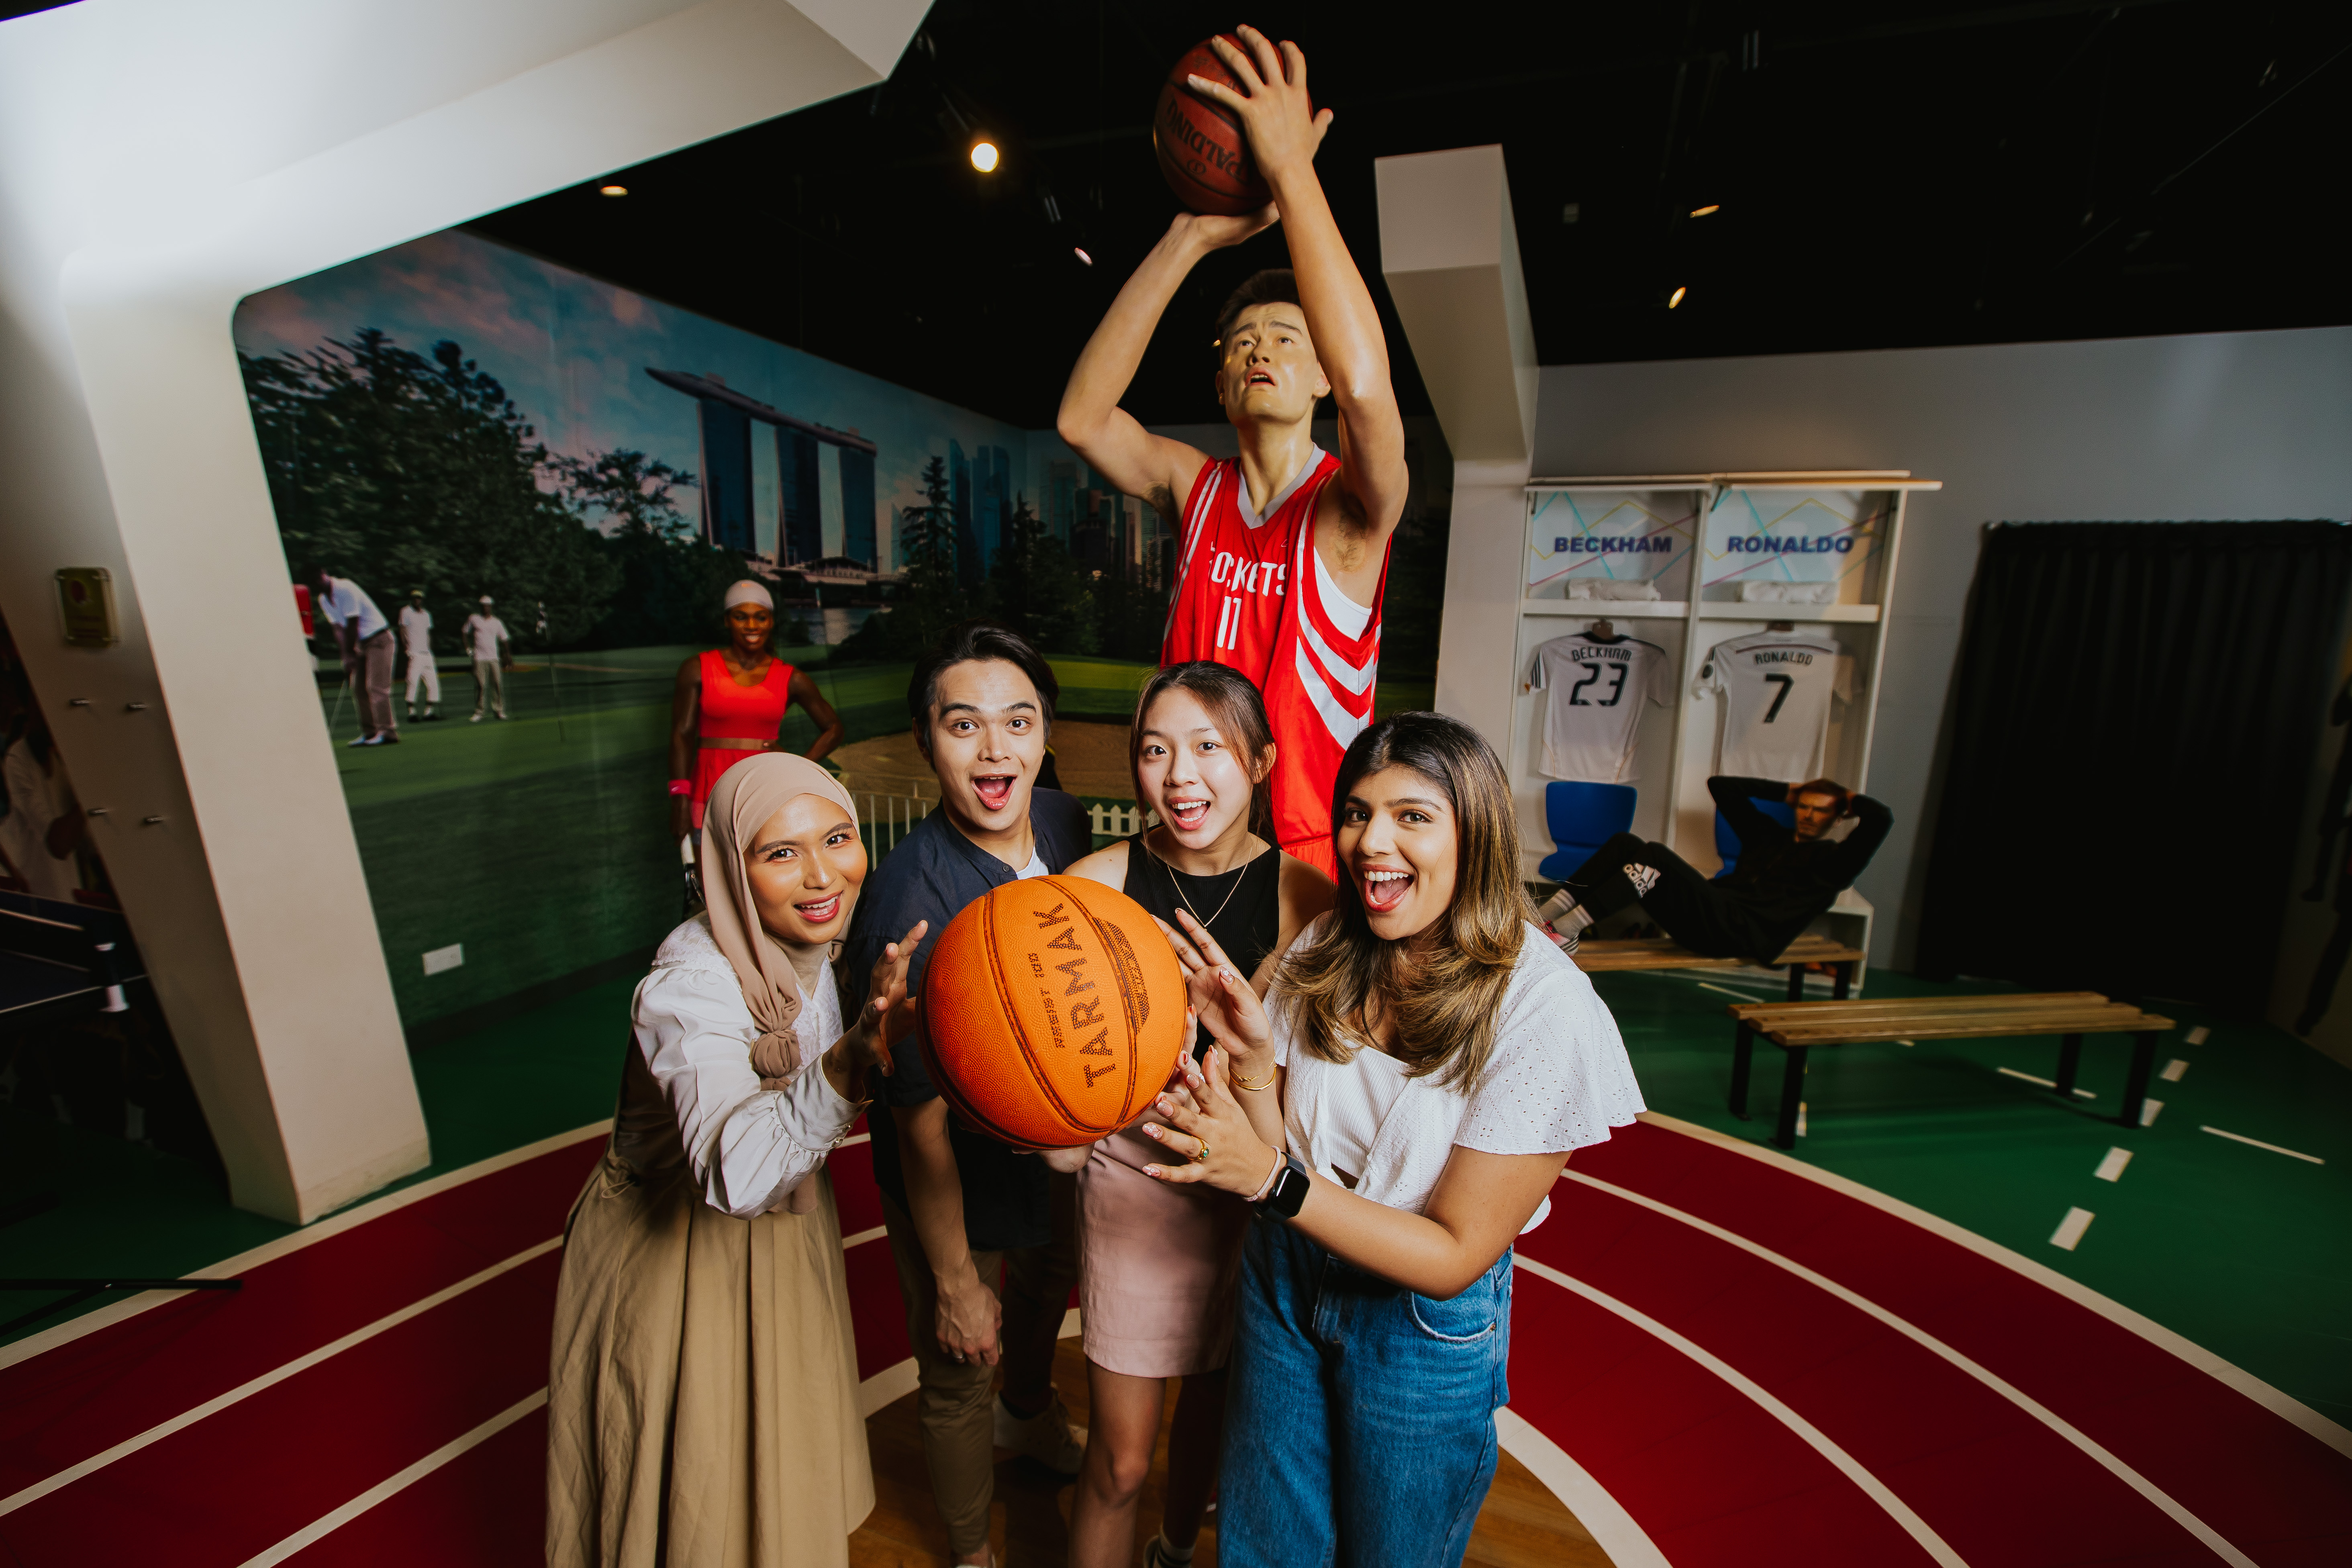 At Madame Tussauds, three girls and a boy happily mimic holding a basketball in front of Yao Ming's wax figure. His impressive height, emphasized by shooting a basketball in the background, highlights his title as the tallest Chinese NBA player. 